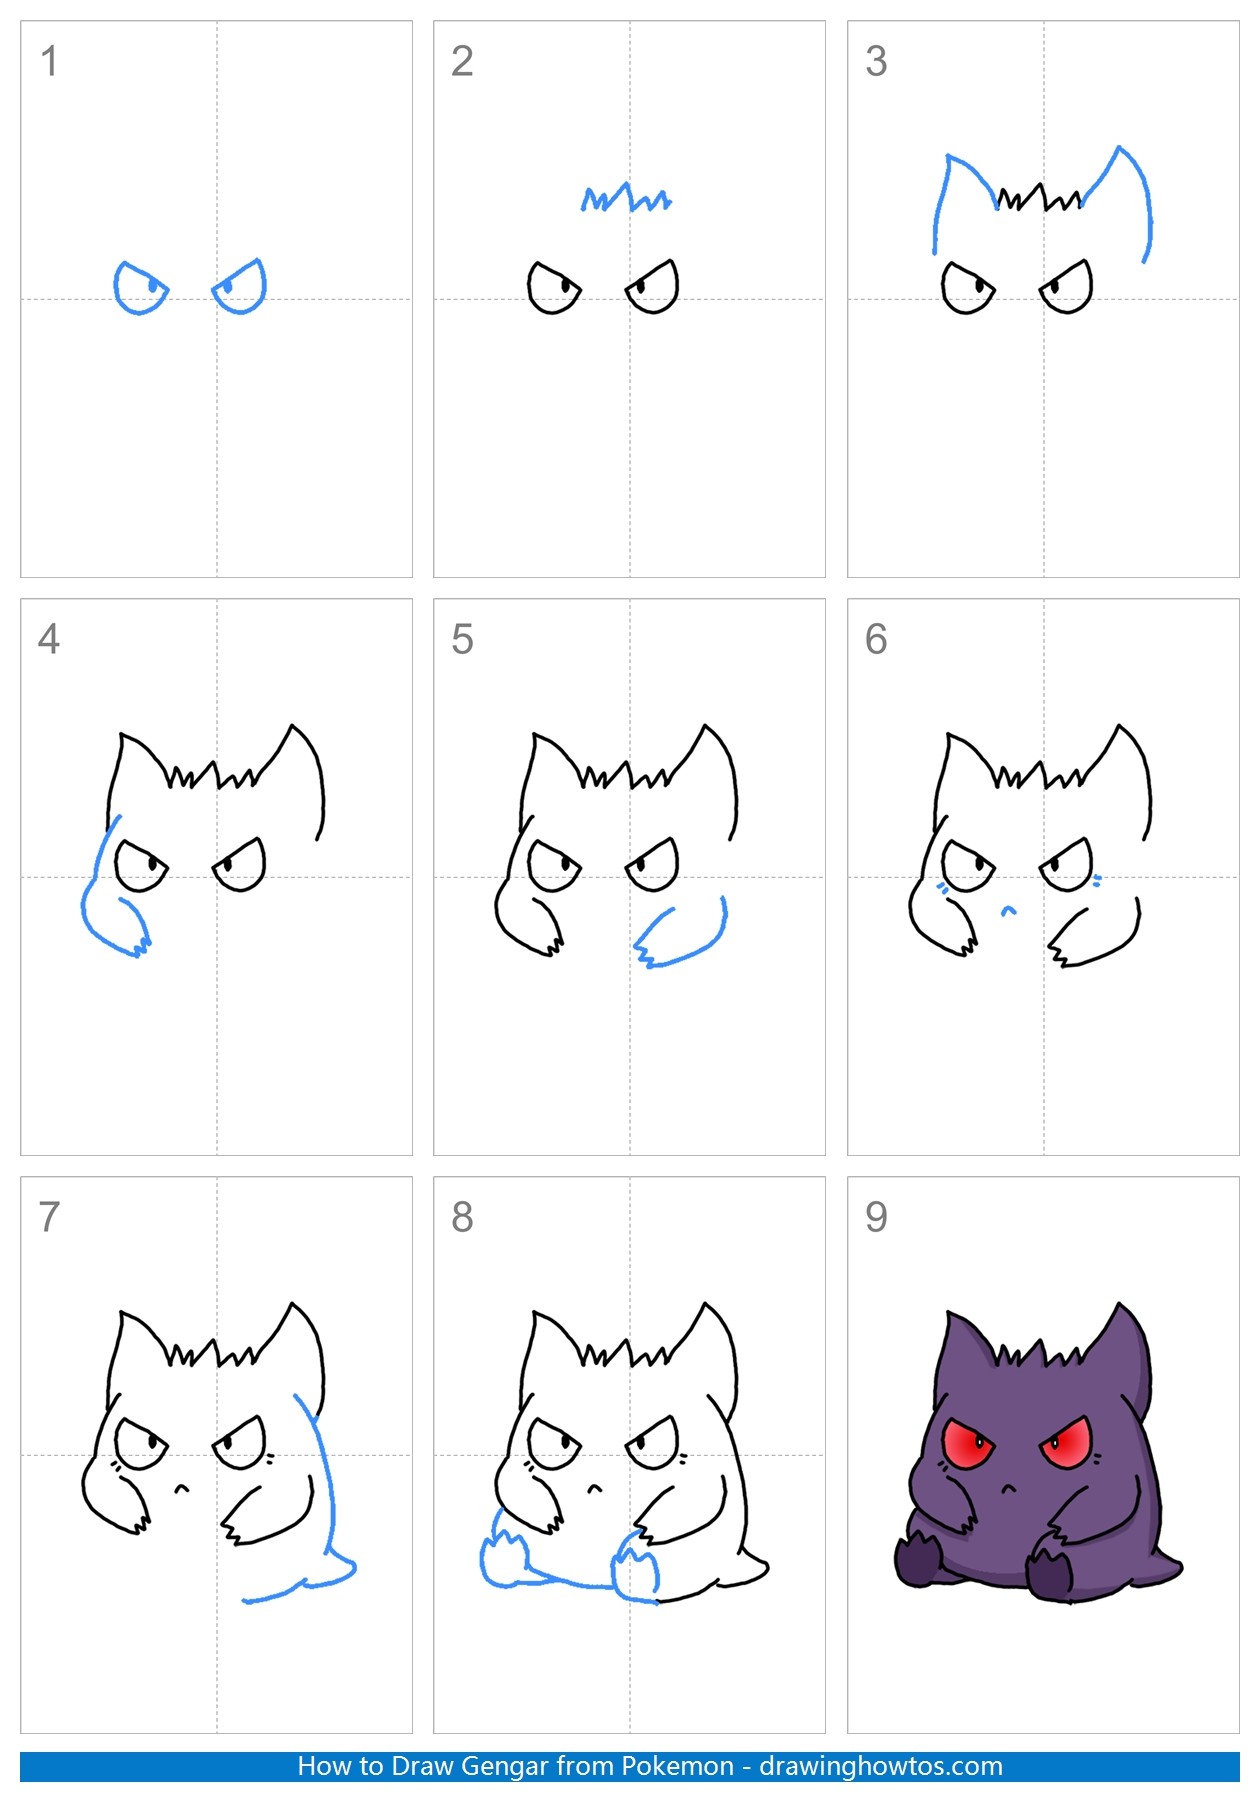 How to Draw Gengar | Pokemon Step by Step